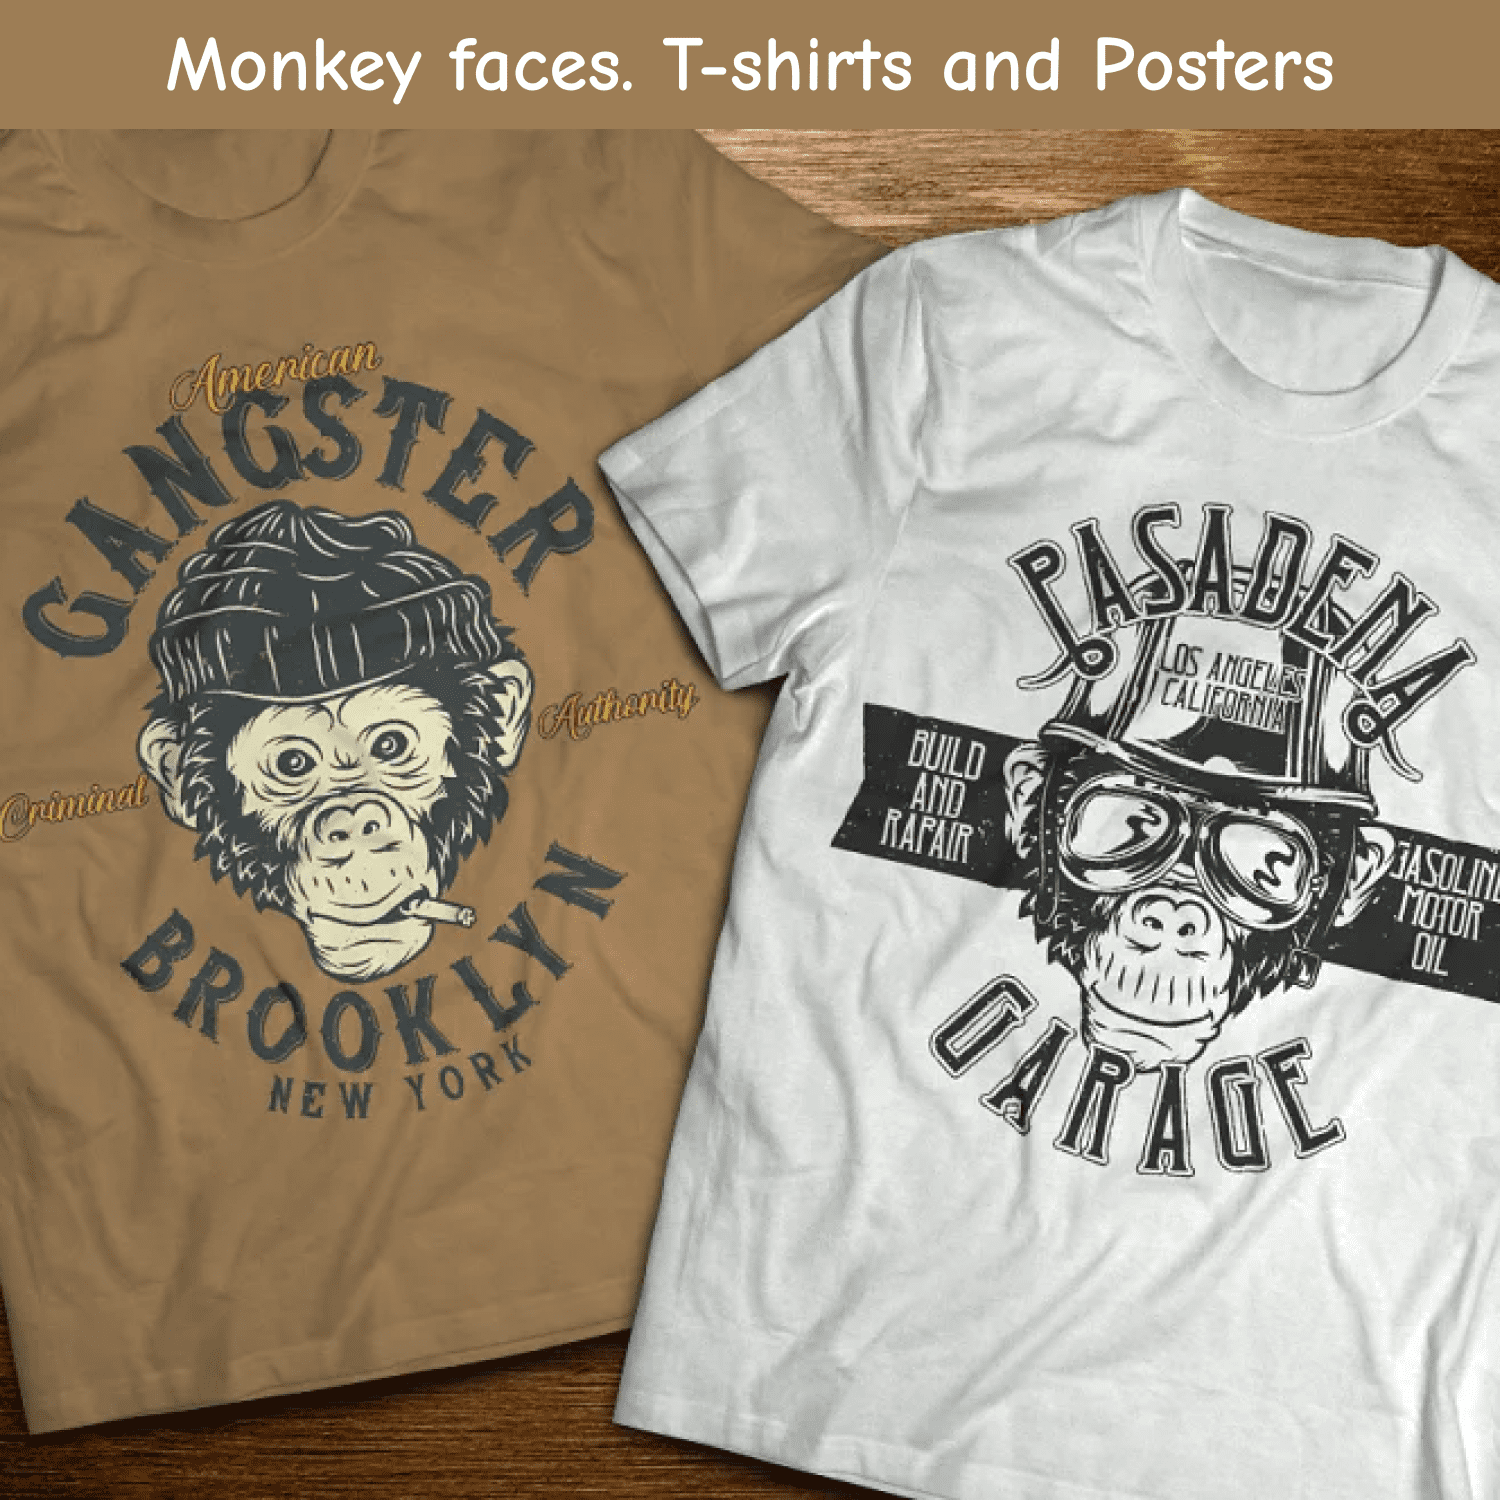 Monkey faces. T-shirts and Posters cover.